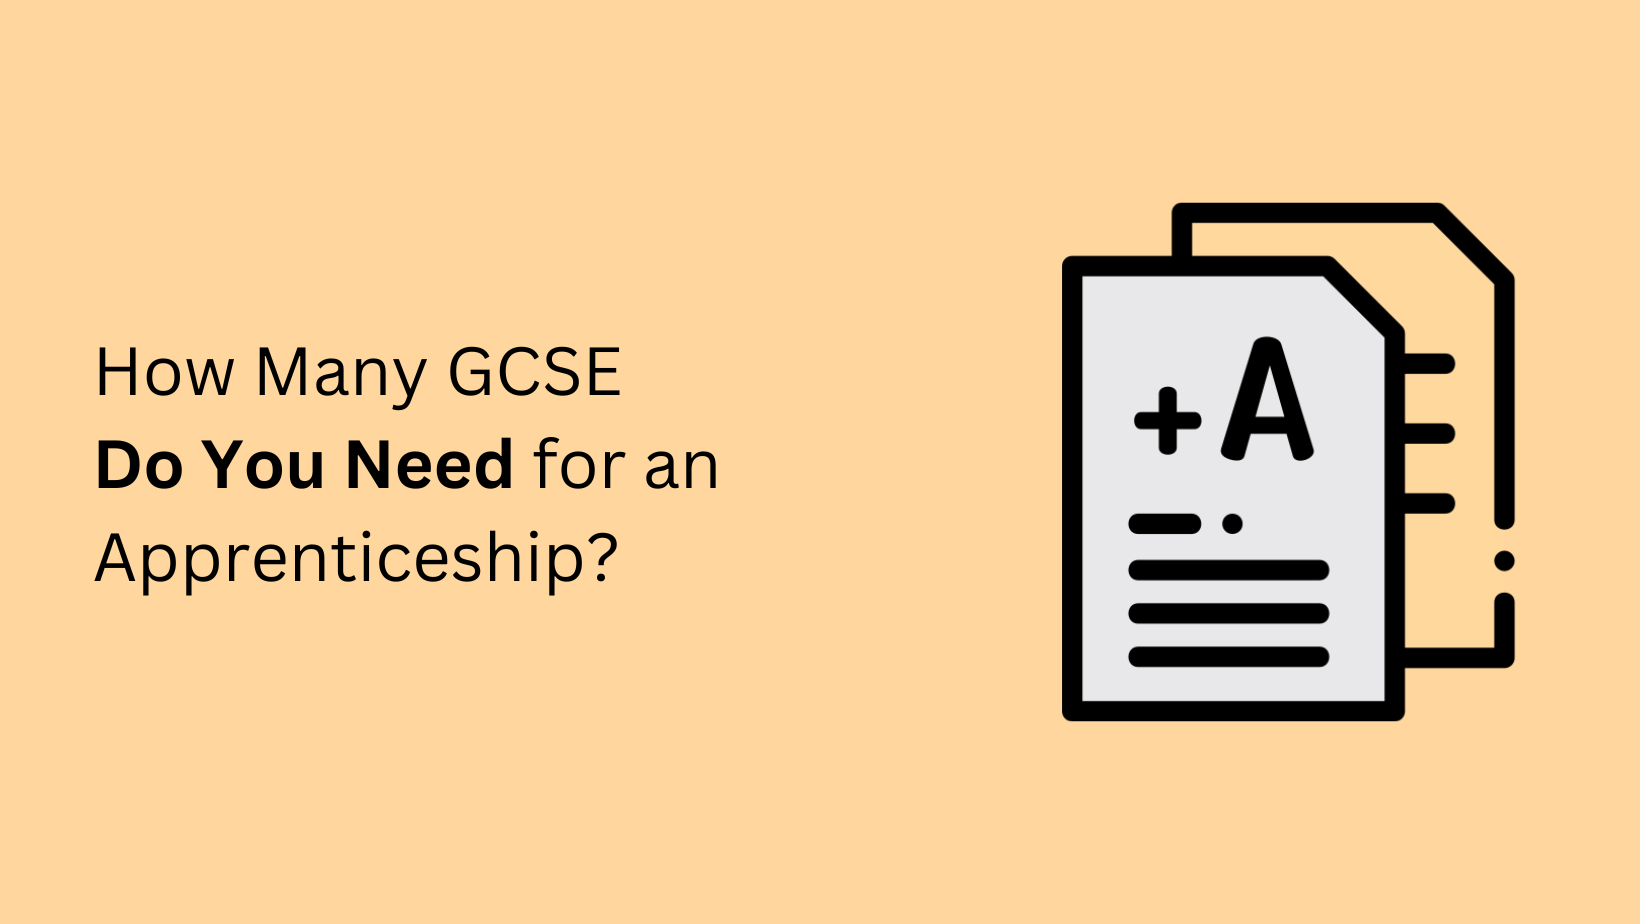 How Many GCSE Do You Need for an Apprenticeship